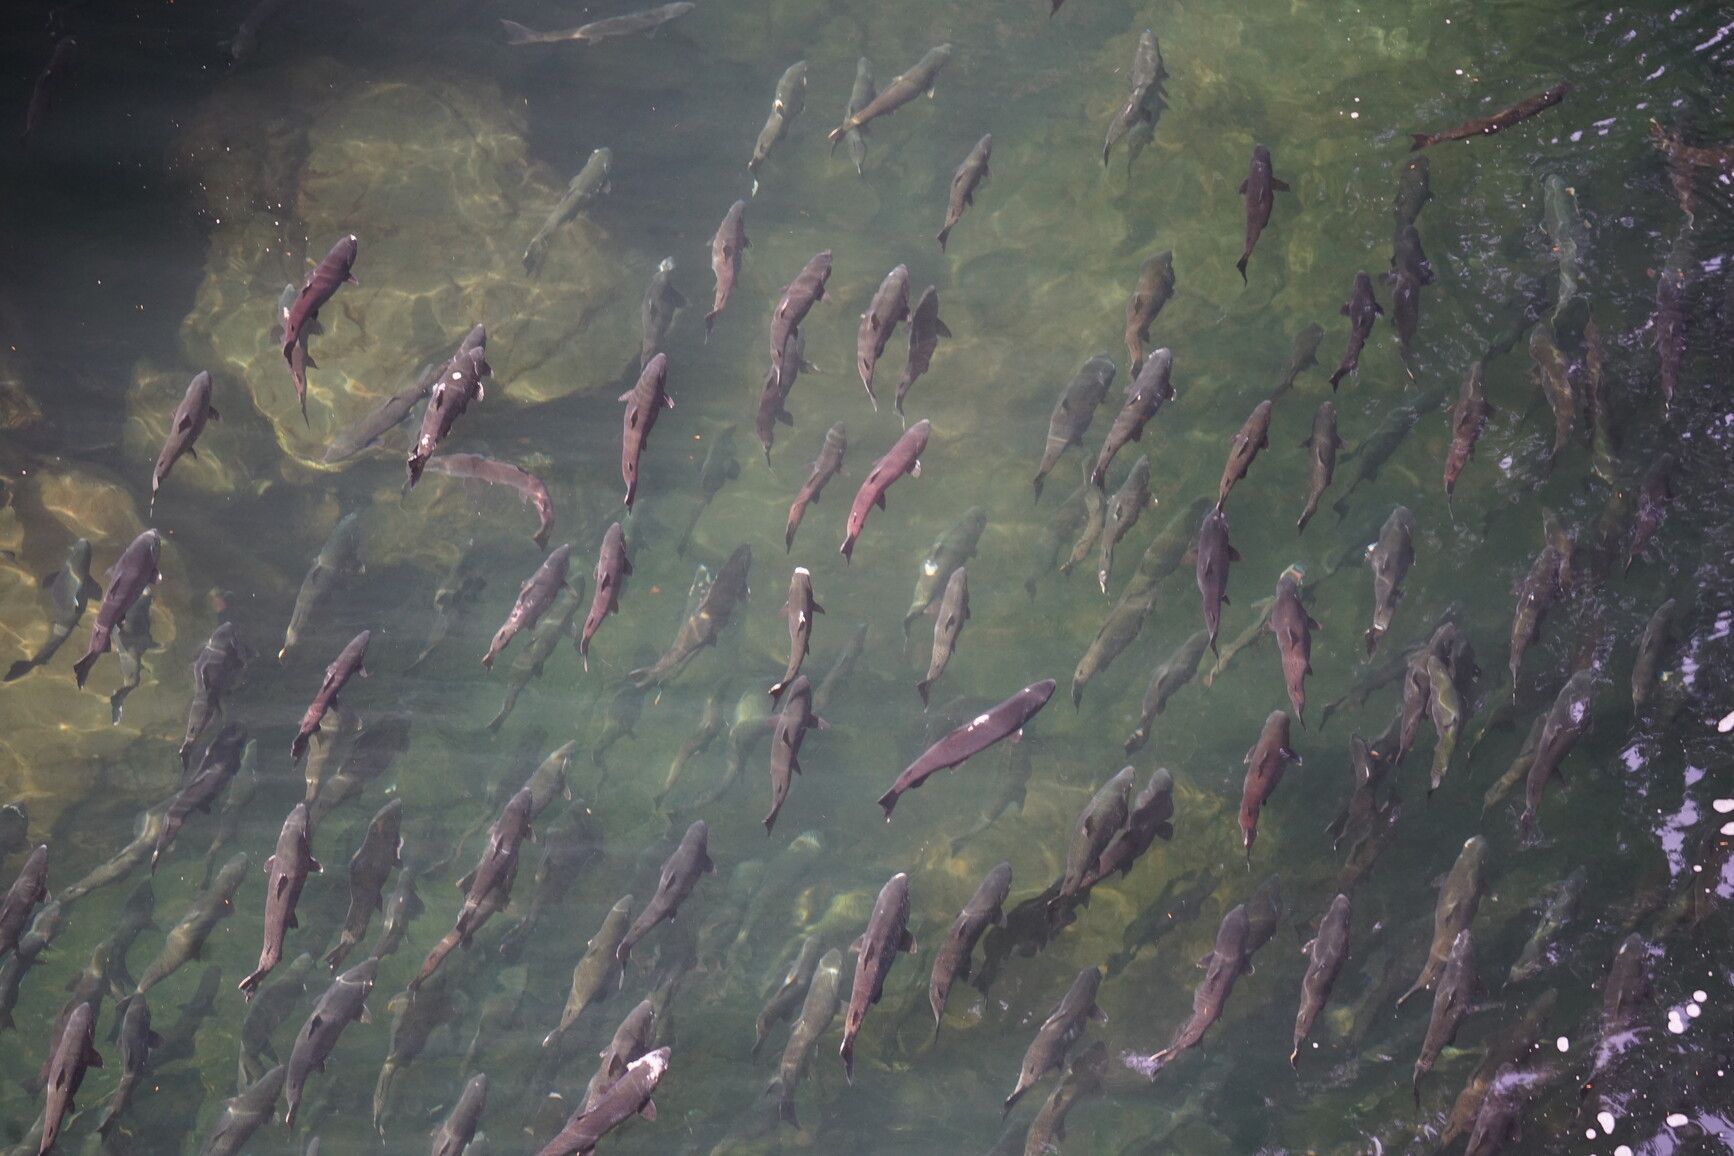 Chinook salmon (Oncorhynchus tshawytscha) swimming upriver in Stamp River Park.